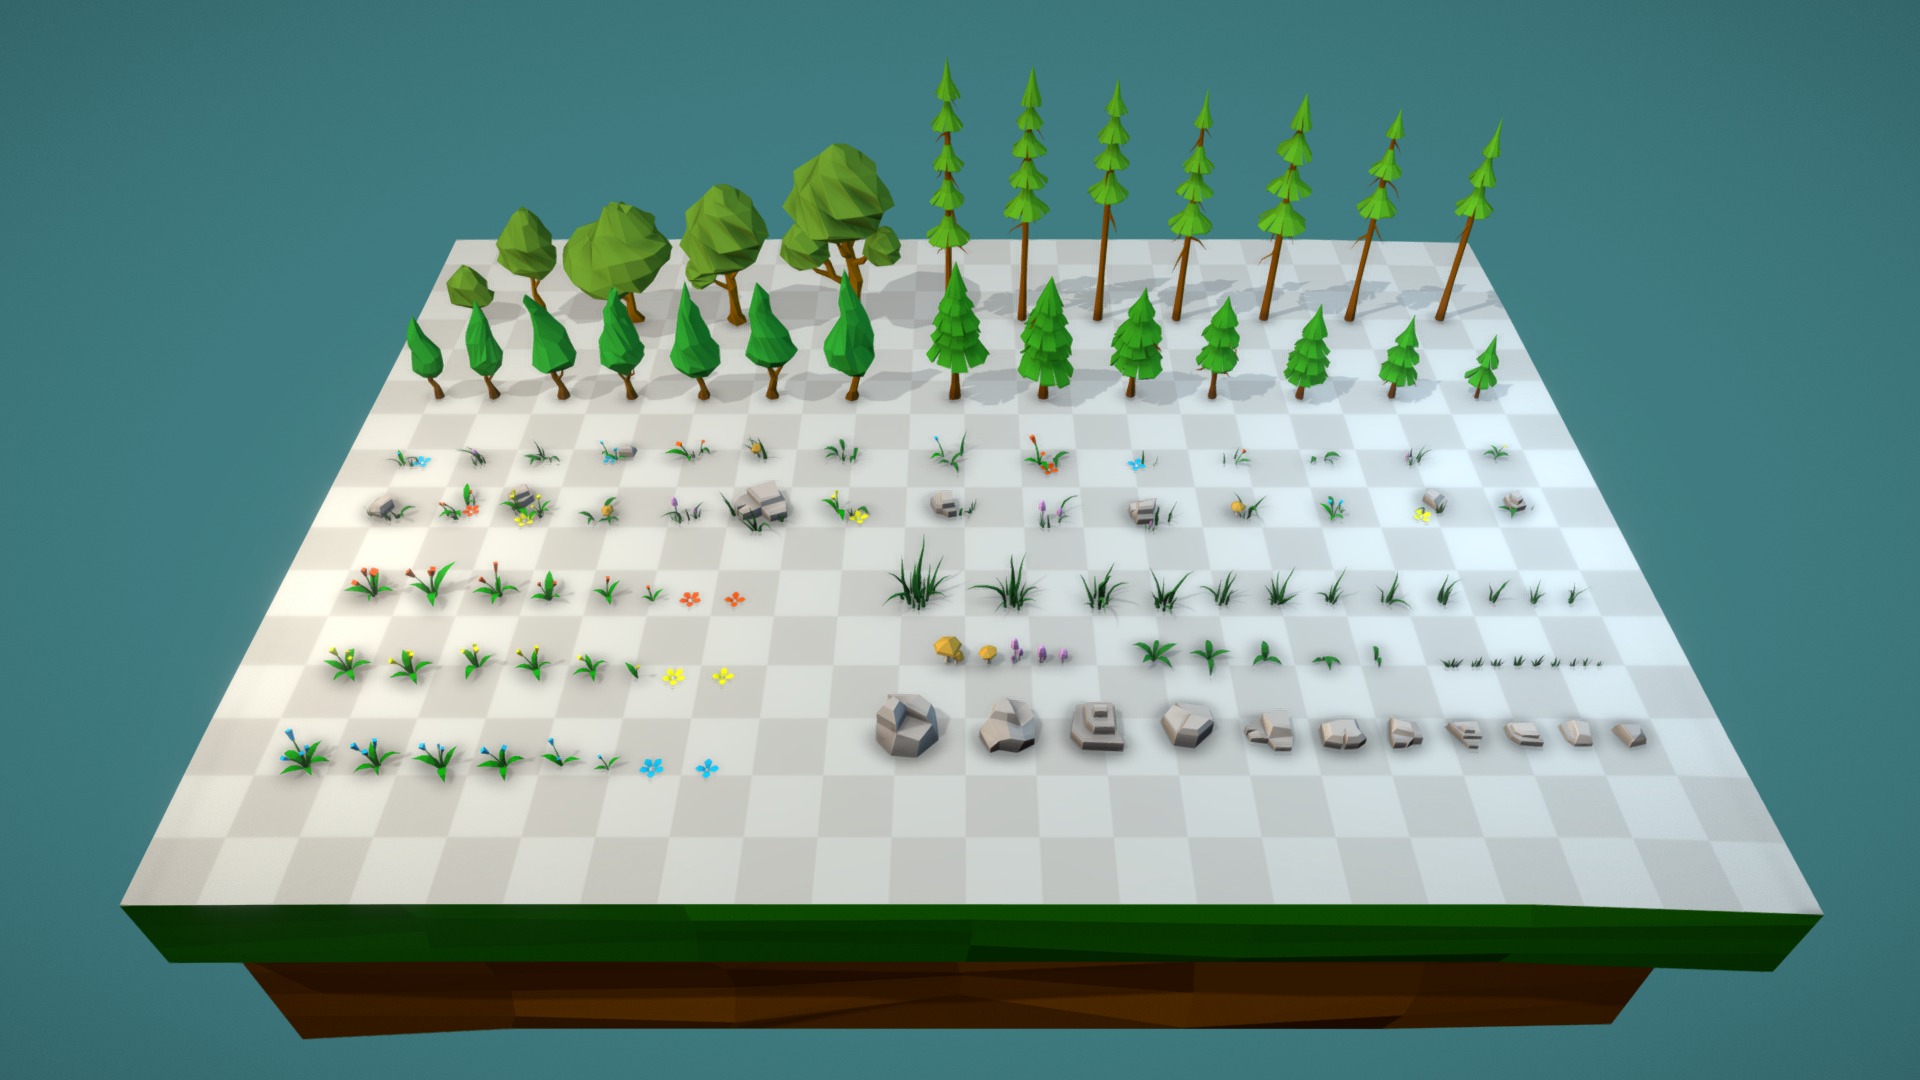 Low poly forest assets pack, ready for games. This models pack has everything you need to create a stylized forest. All assets are created in a low poly art style, which essentially doesn't require any textures. The material setups are simple and you are able to customize them easily! 

Includes: 
-   26 Trees;
-   24 Flowers;
-   26 Grass;
-   11 Rocks;
-   5 Mushroom;
-   28 Mixed Elements.

22 materials are used in the scene.

Additional formats: fbx, obj, 3ds, blend, max, unitypackage.

I hope you will enjoy my product! - Trees Flowers And Rocks - 3D model by Maksim Batyrev (@c3posw01) 3d model